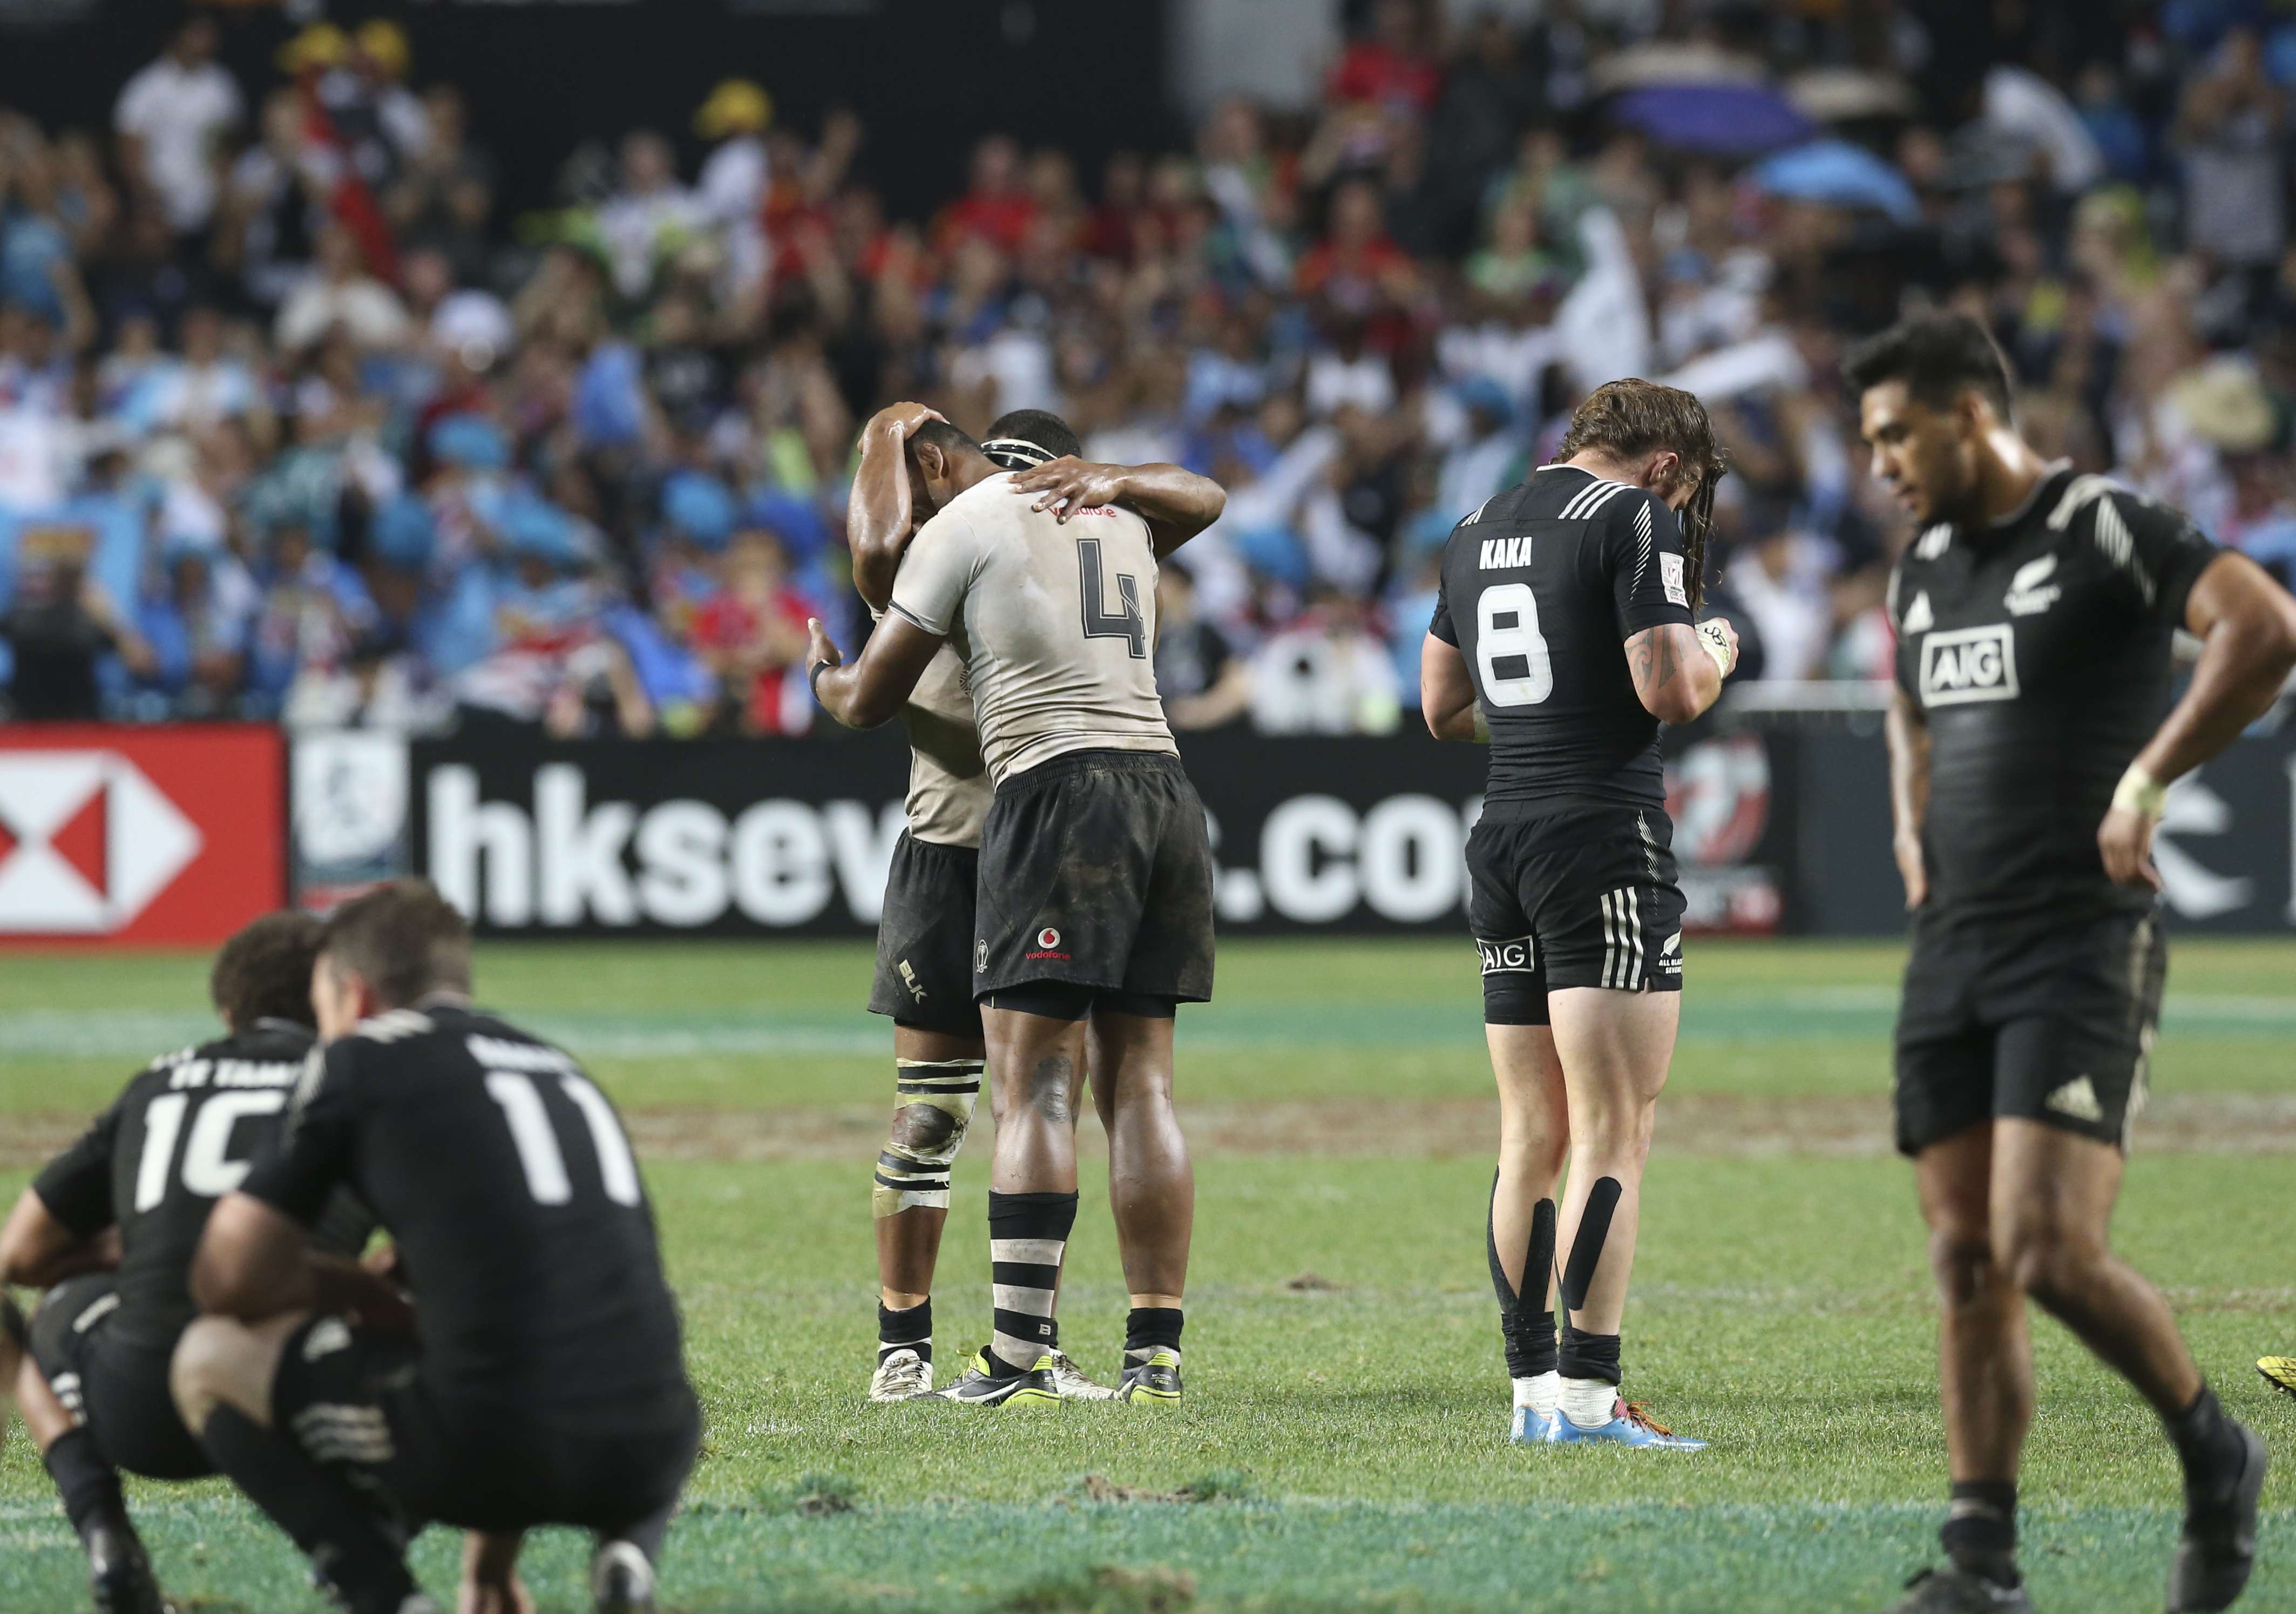 Fijians celebrates as New Zealand players react with disappointment after losing the Cup final at the Hong Kong Sevens On Sunday. Photo: K. Y. Cheng